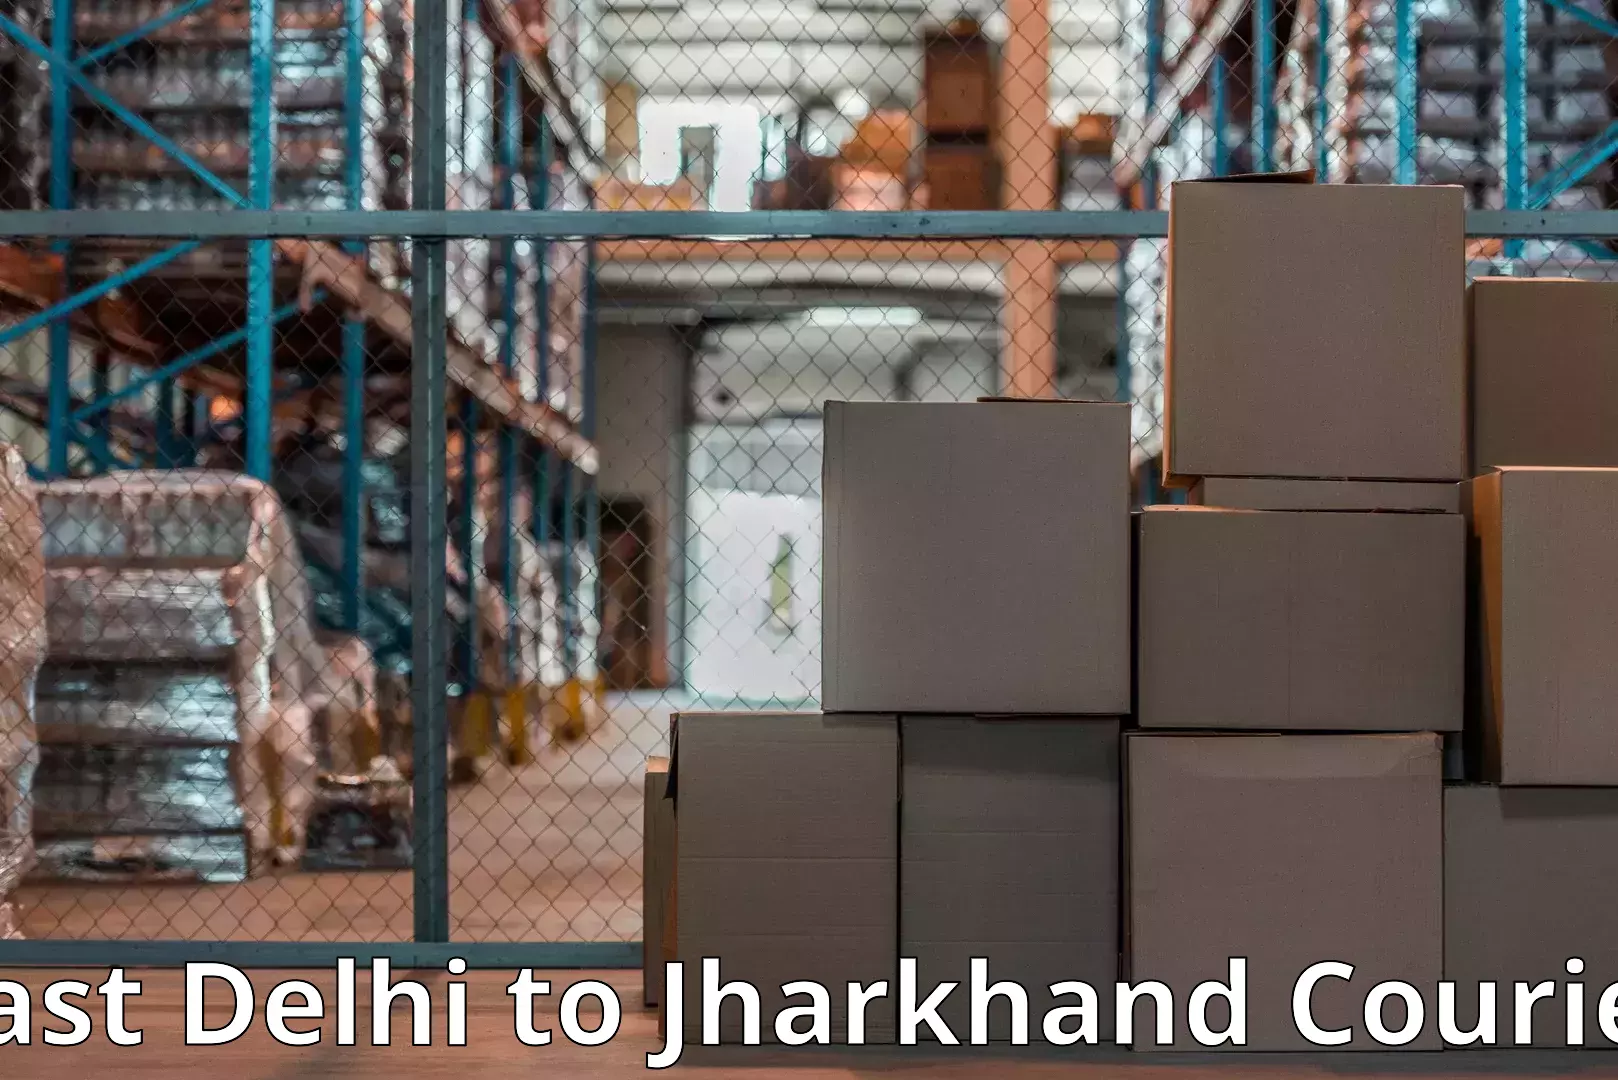 Quality relocation assistance East Delhi to Jharkhand